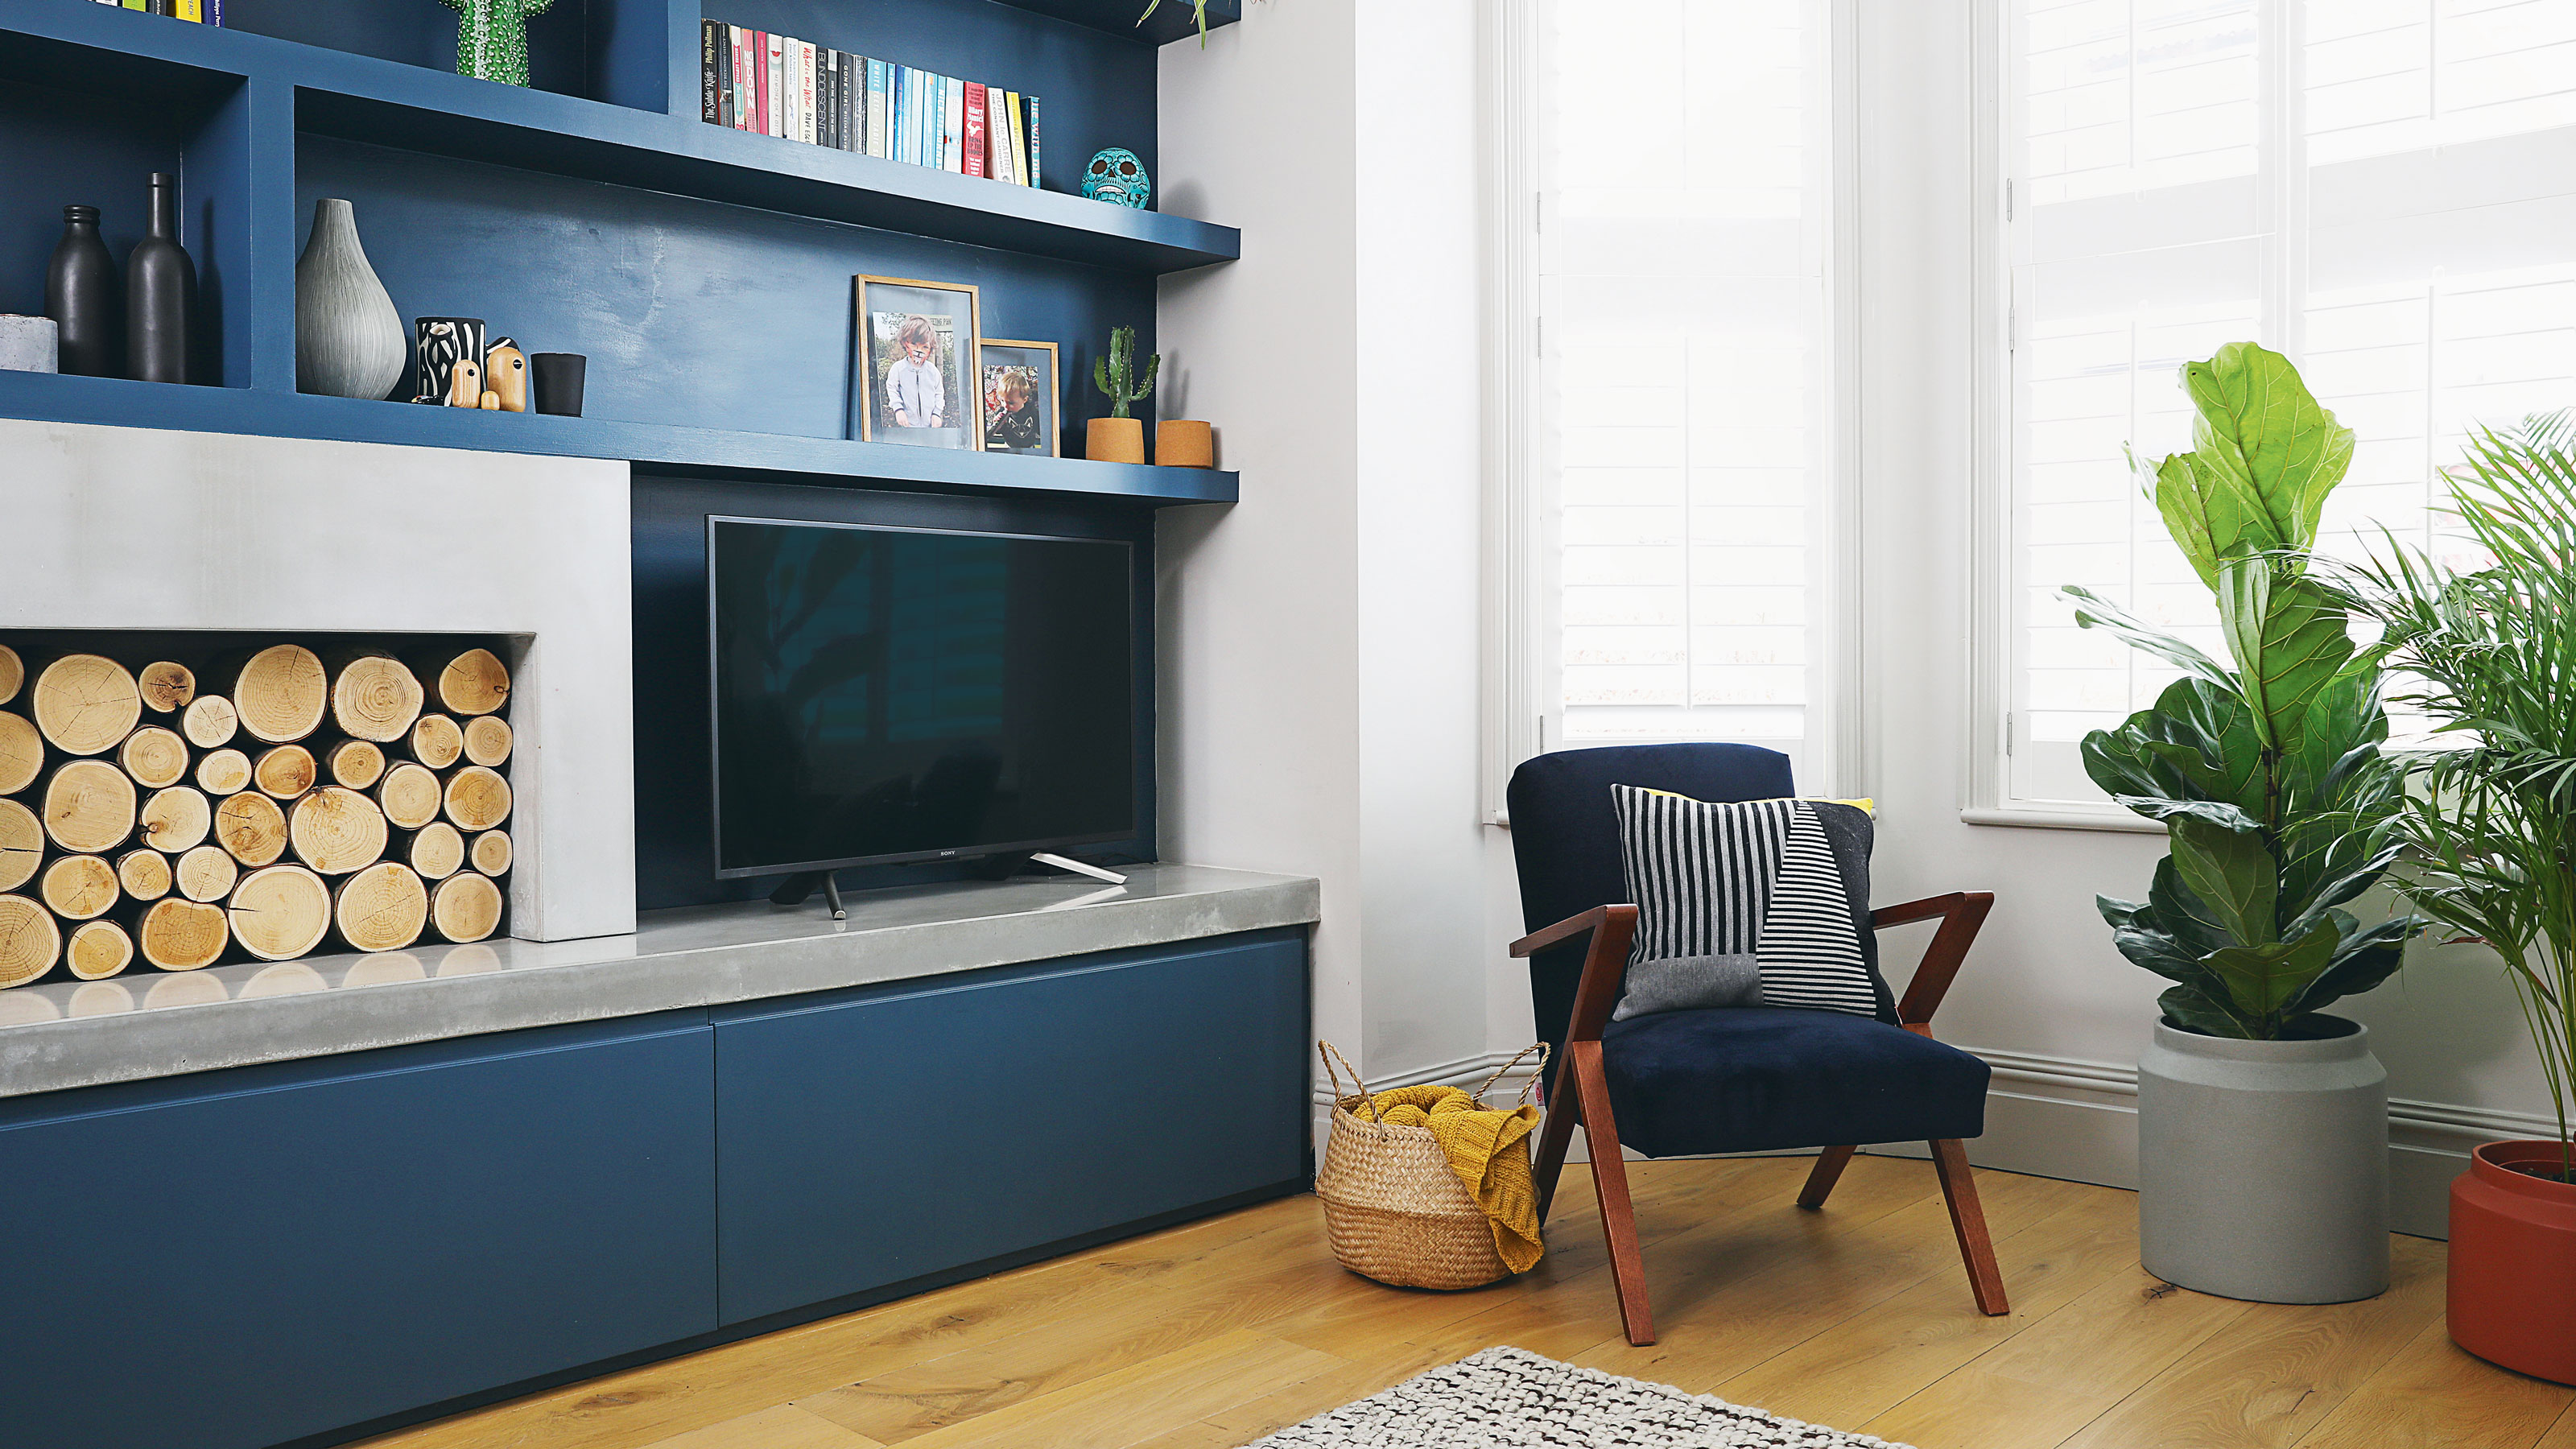 How To Hide A Tv Stylishly – 18 Ways To Disguise Your Telly | Ideal Home